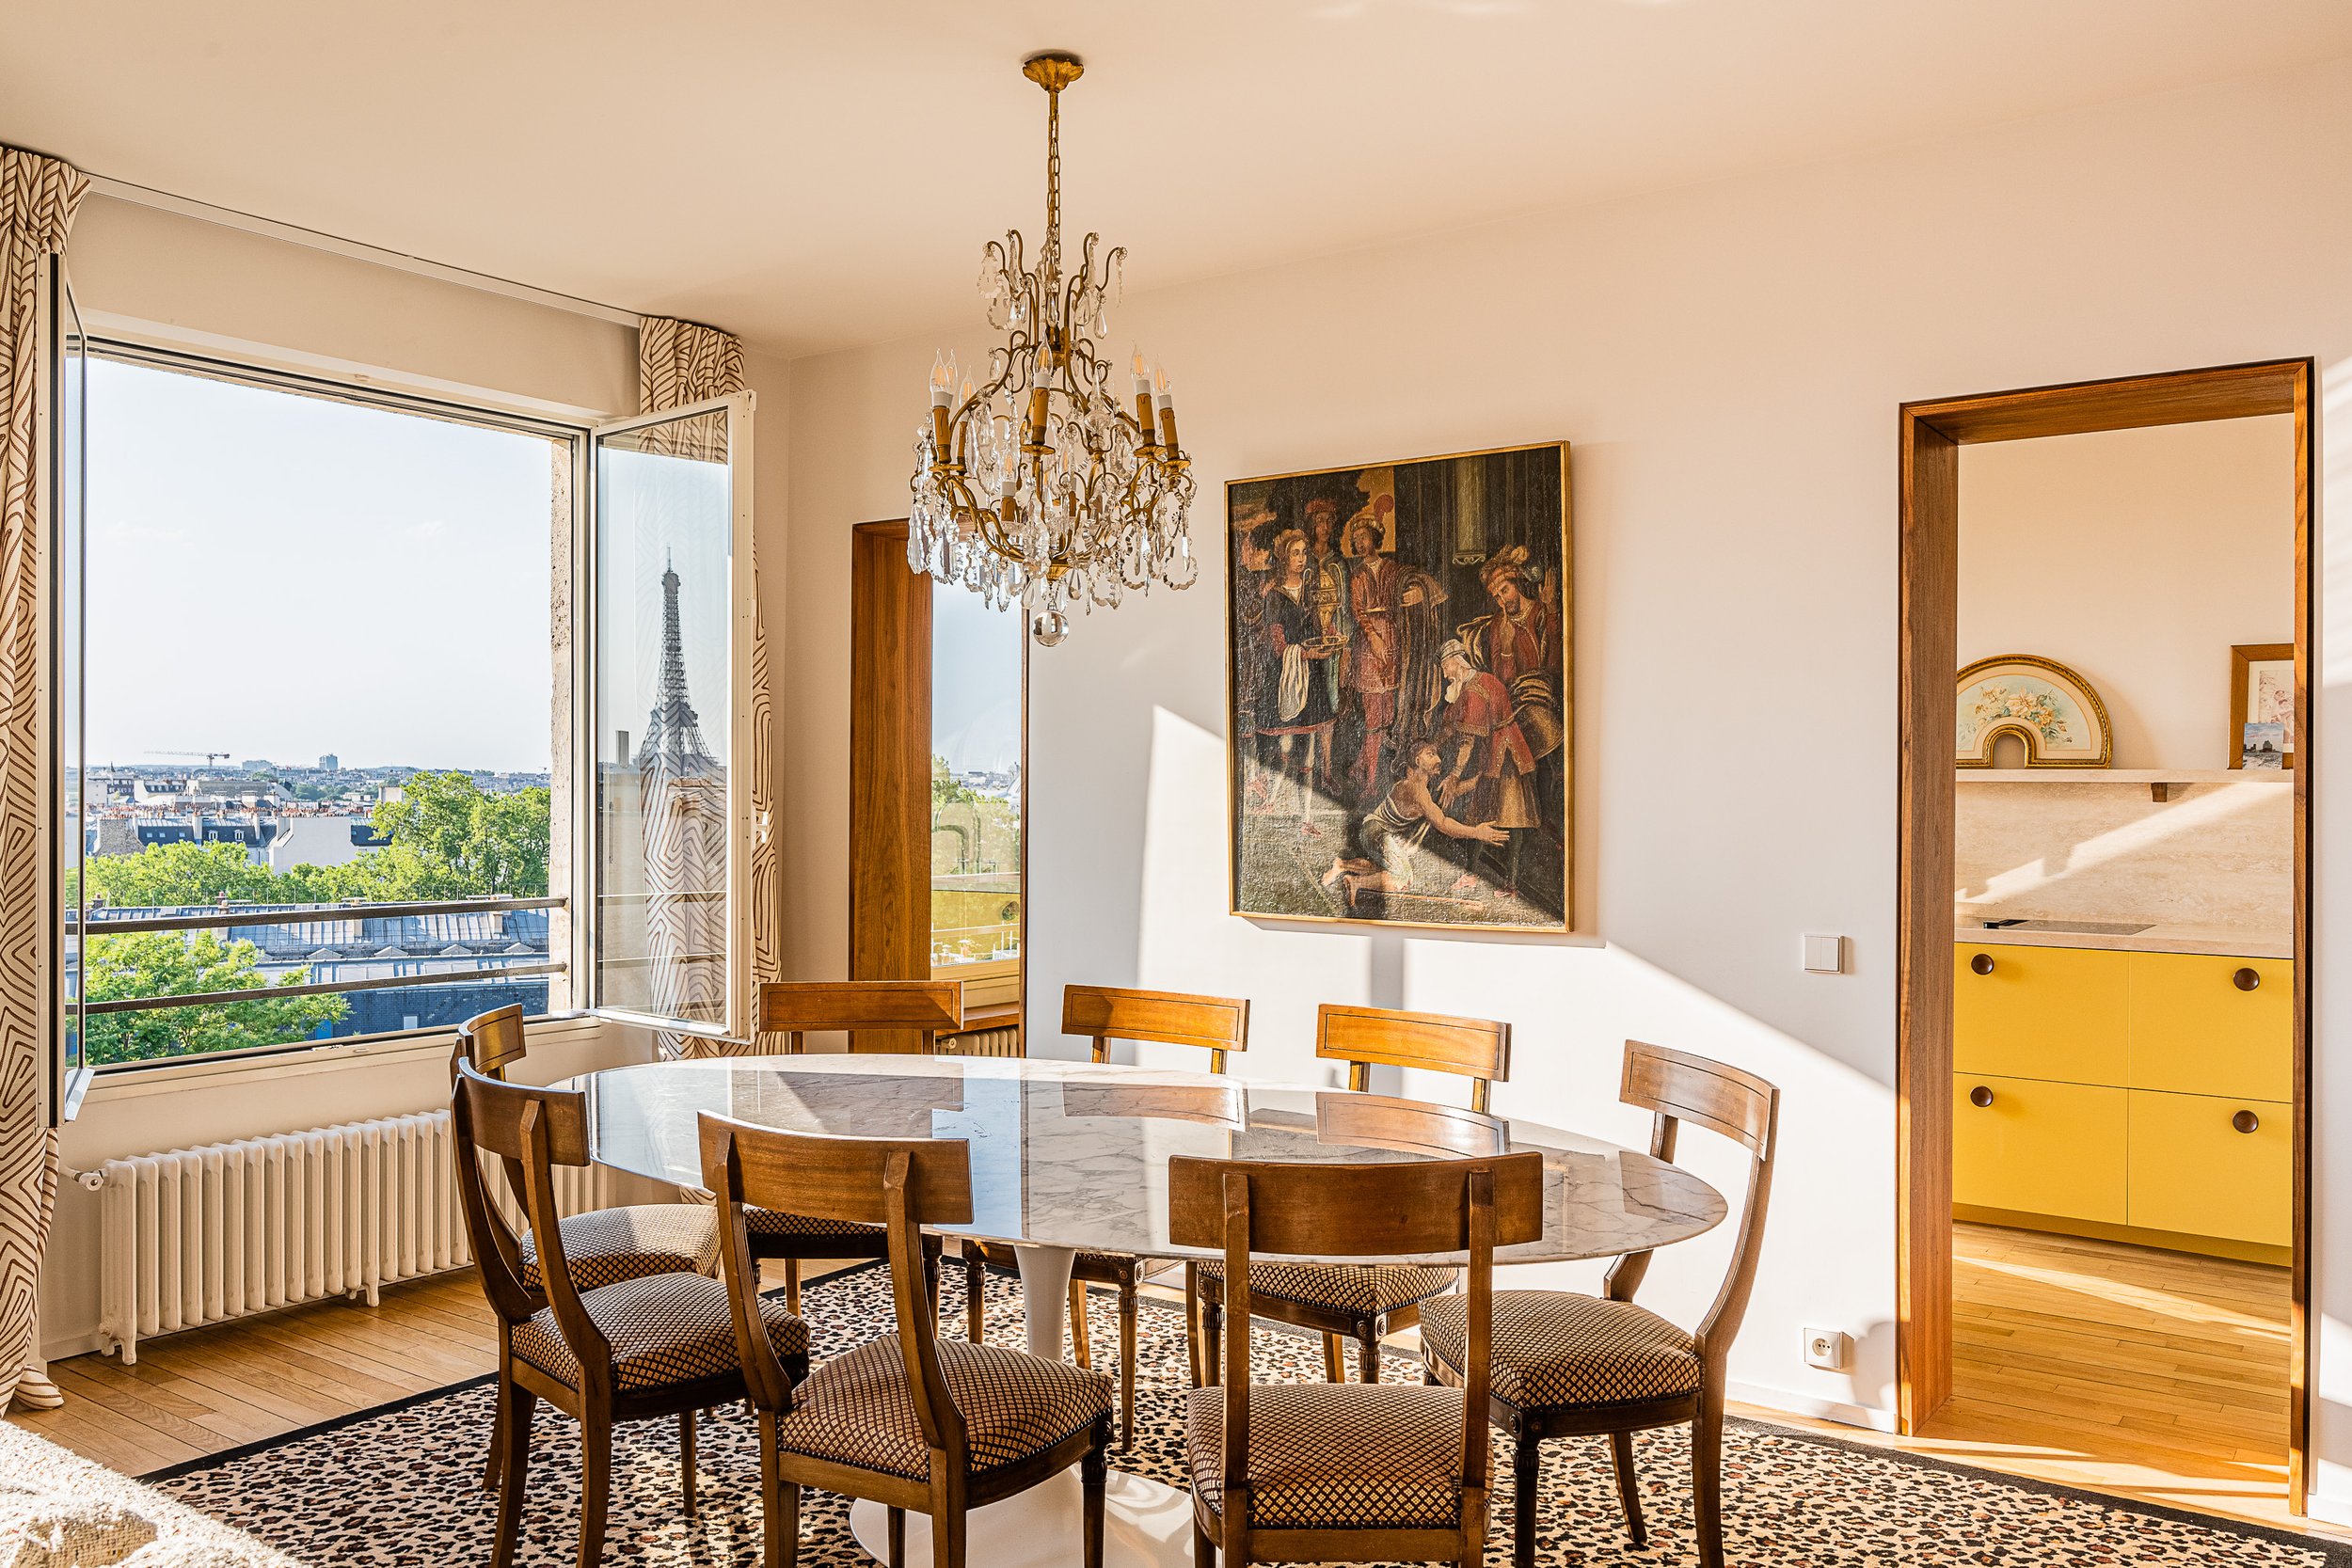 Exceptional apartment and rooftop in the heart of Paris and Saint Germain des Prés overlooking the Eiffel Tower